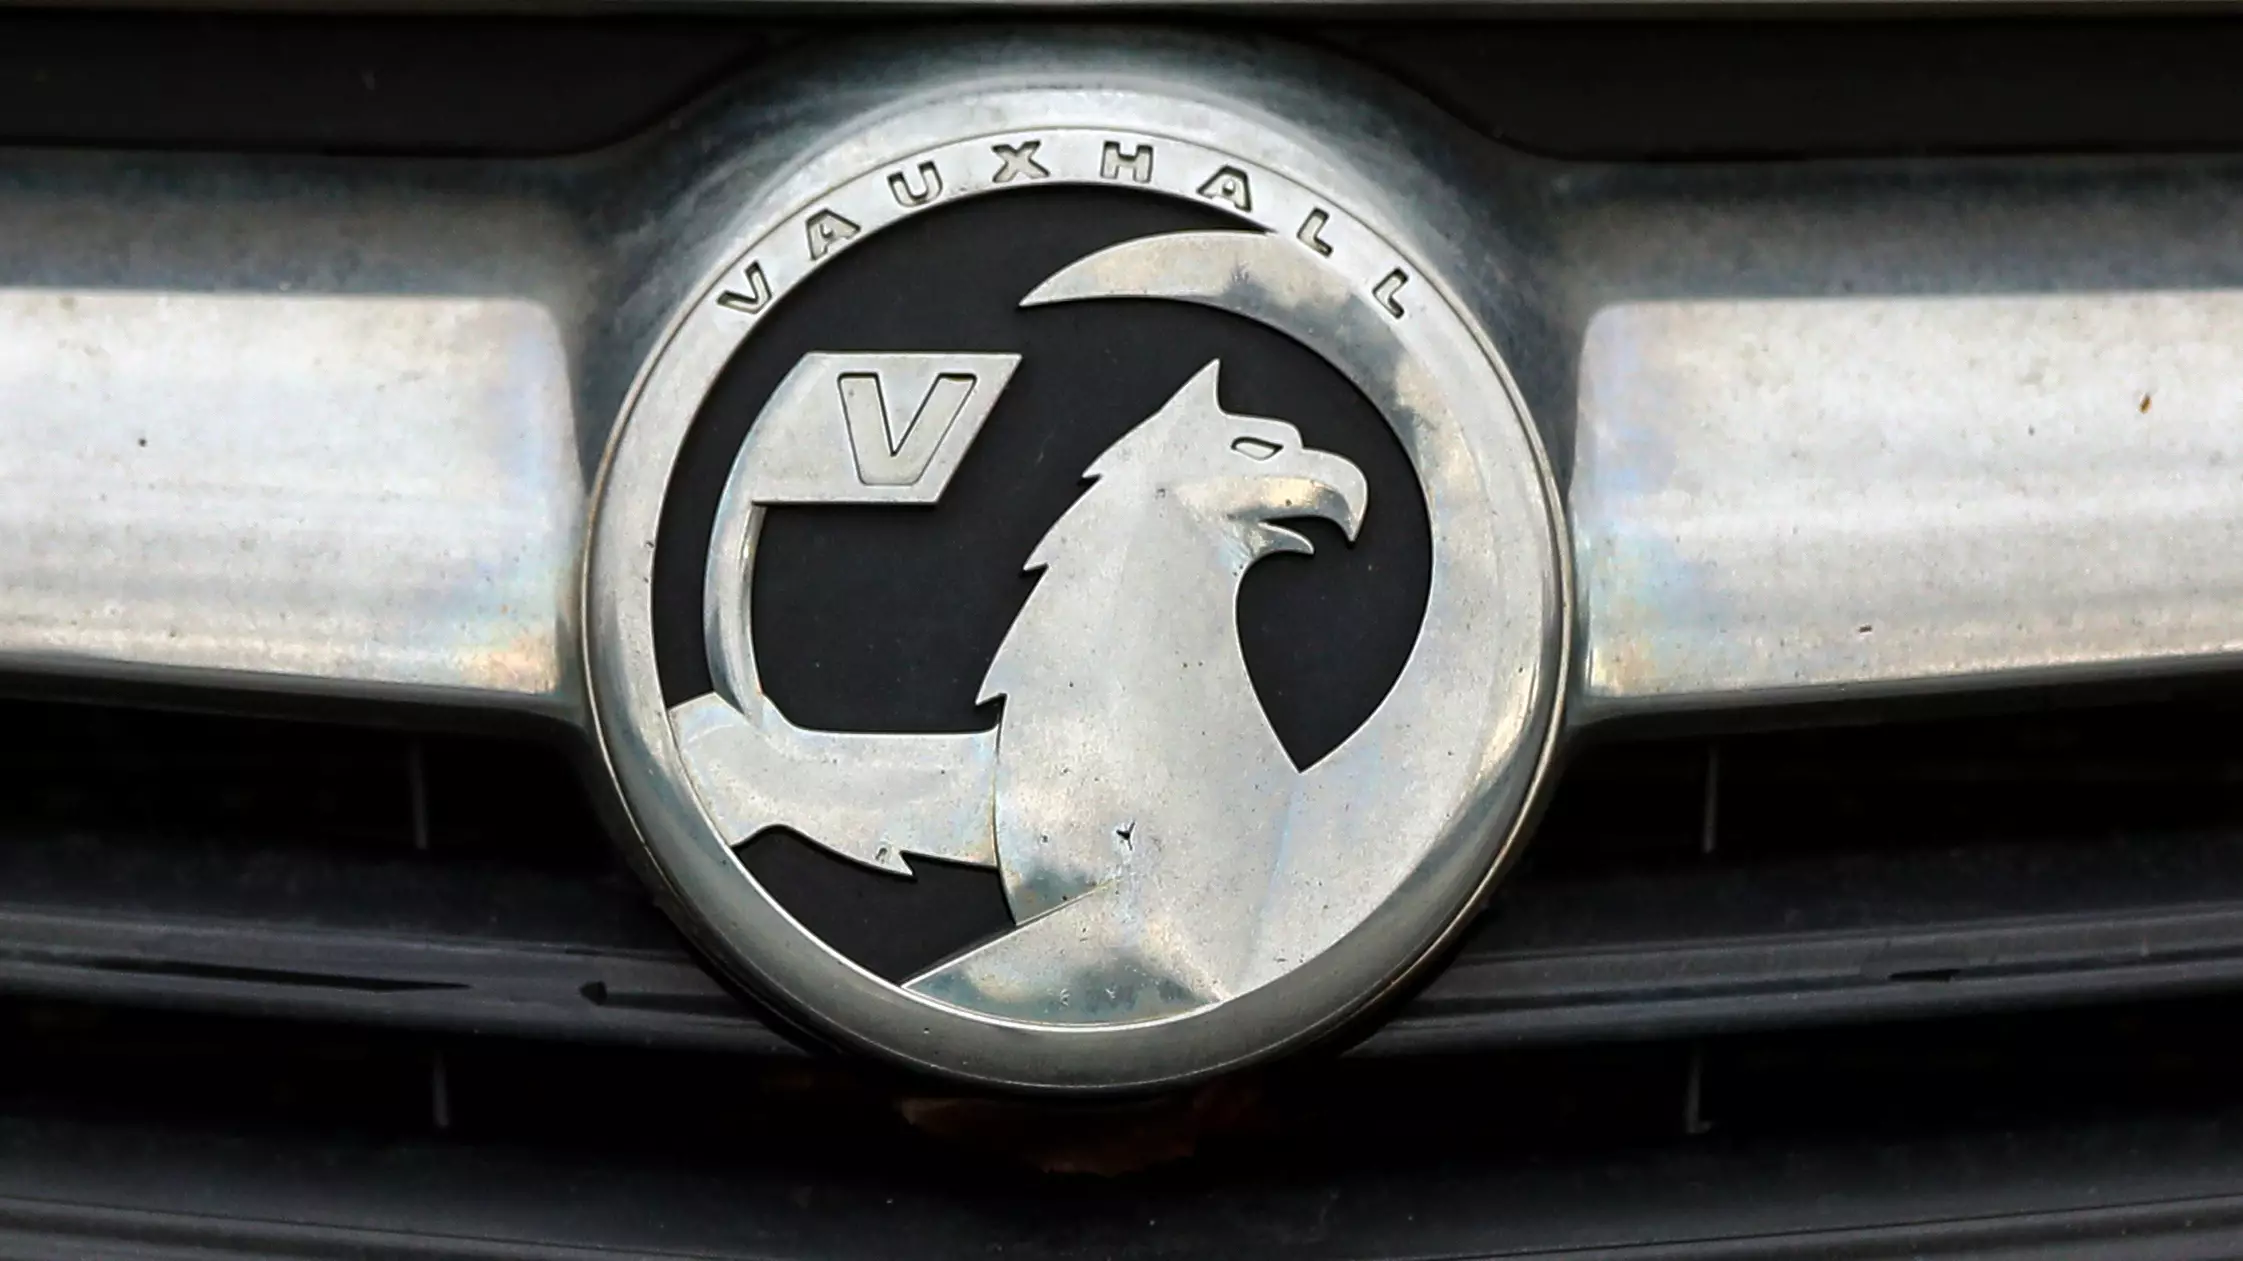 Vauxhall Cars Involved In More Accidents Than Any Others